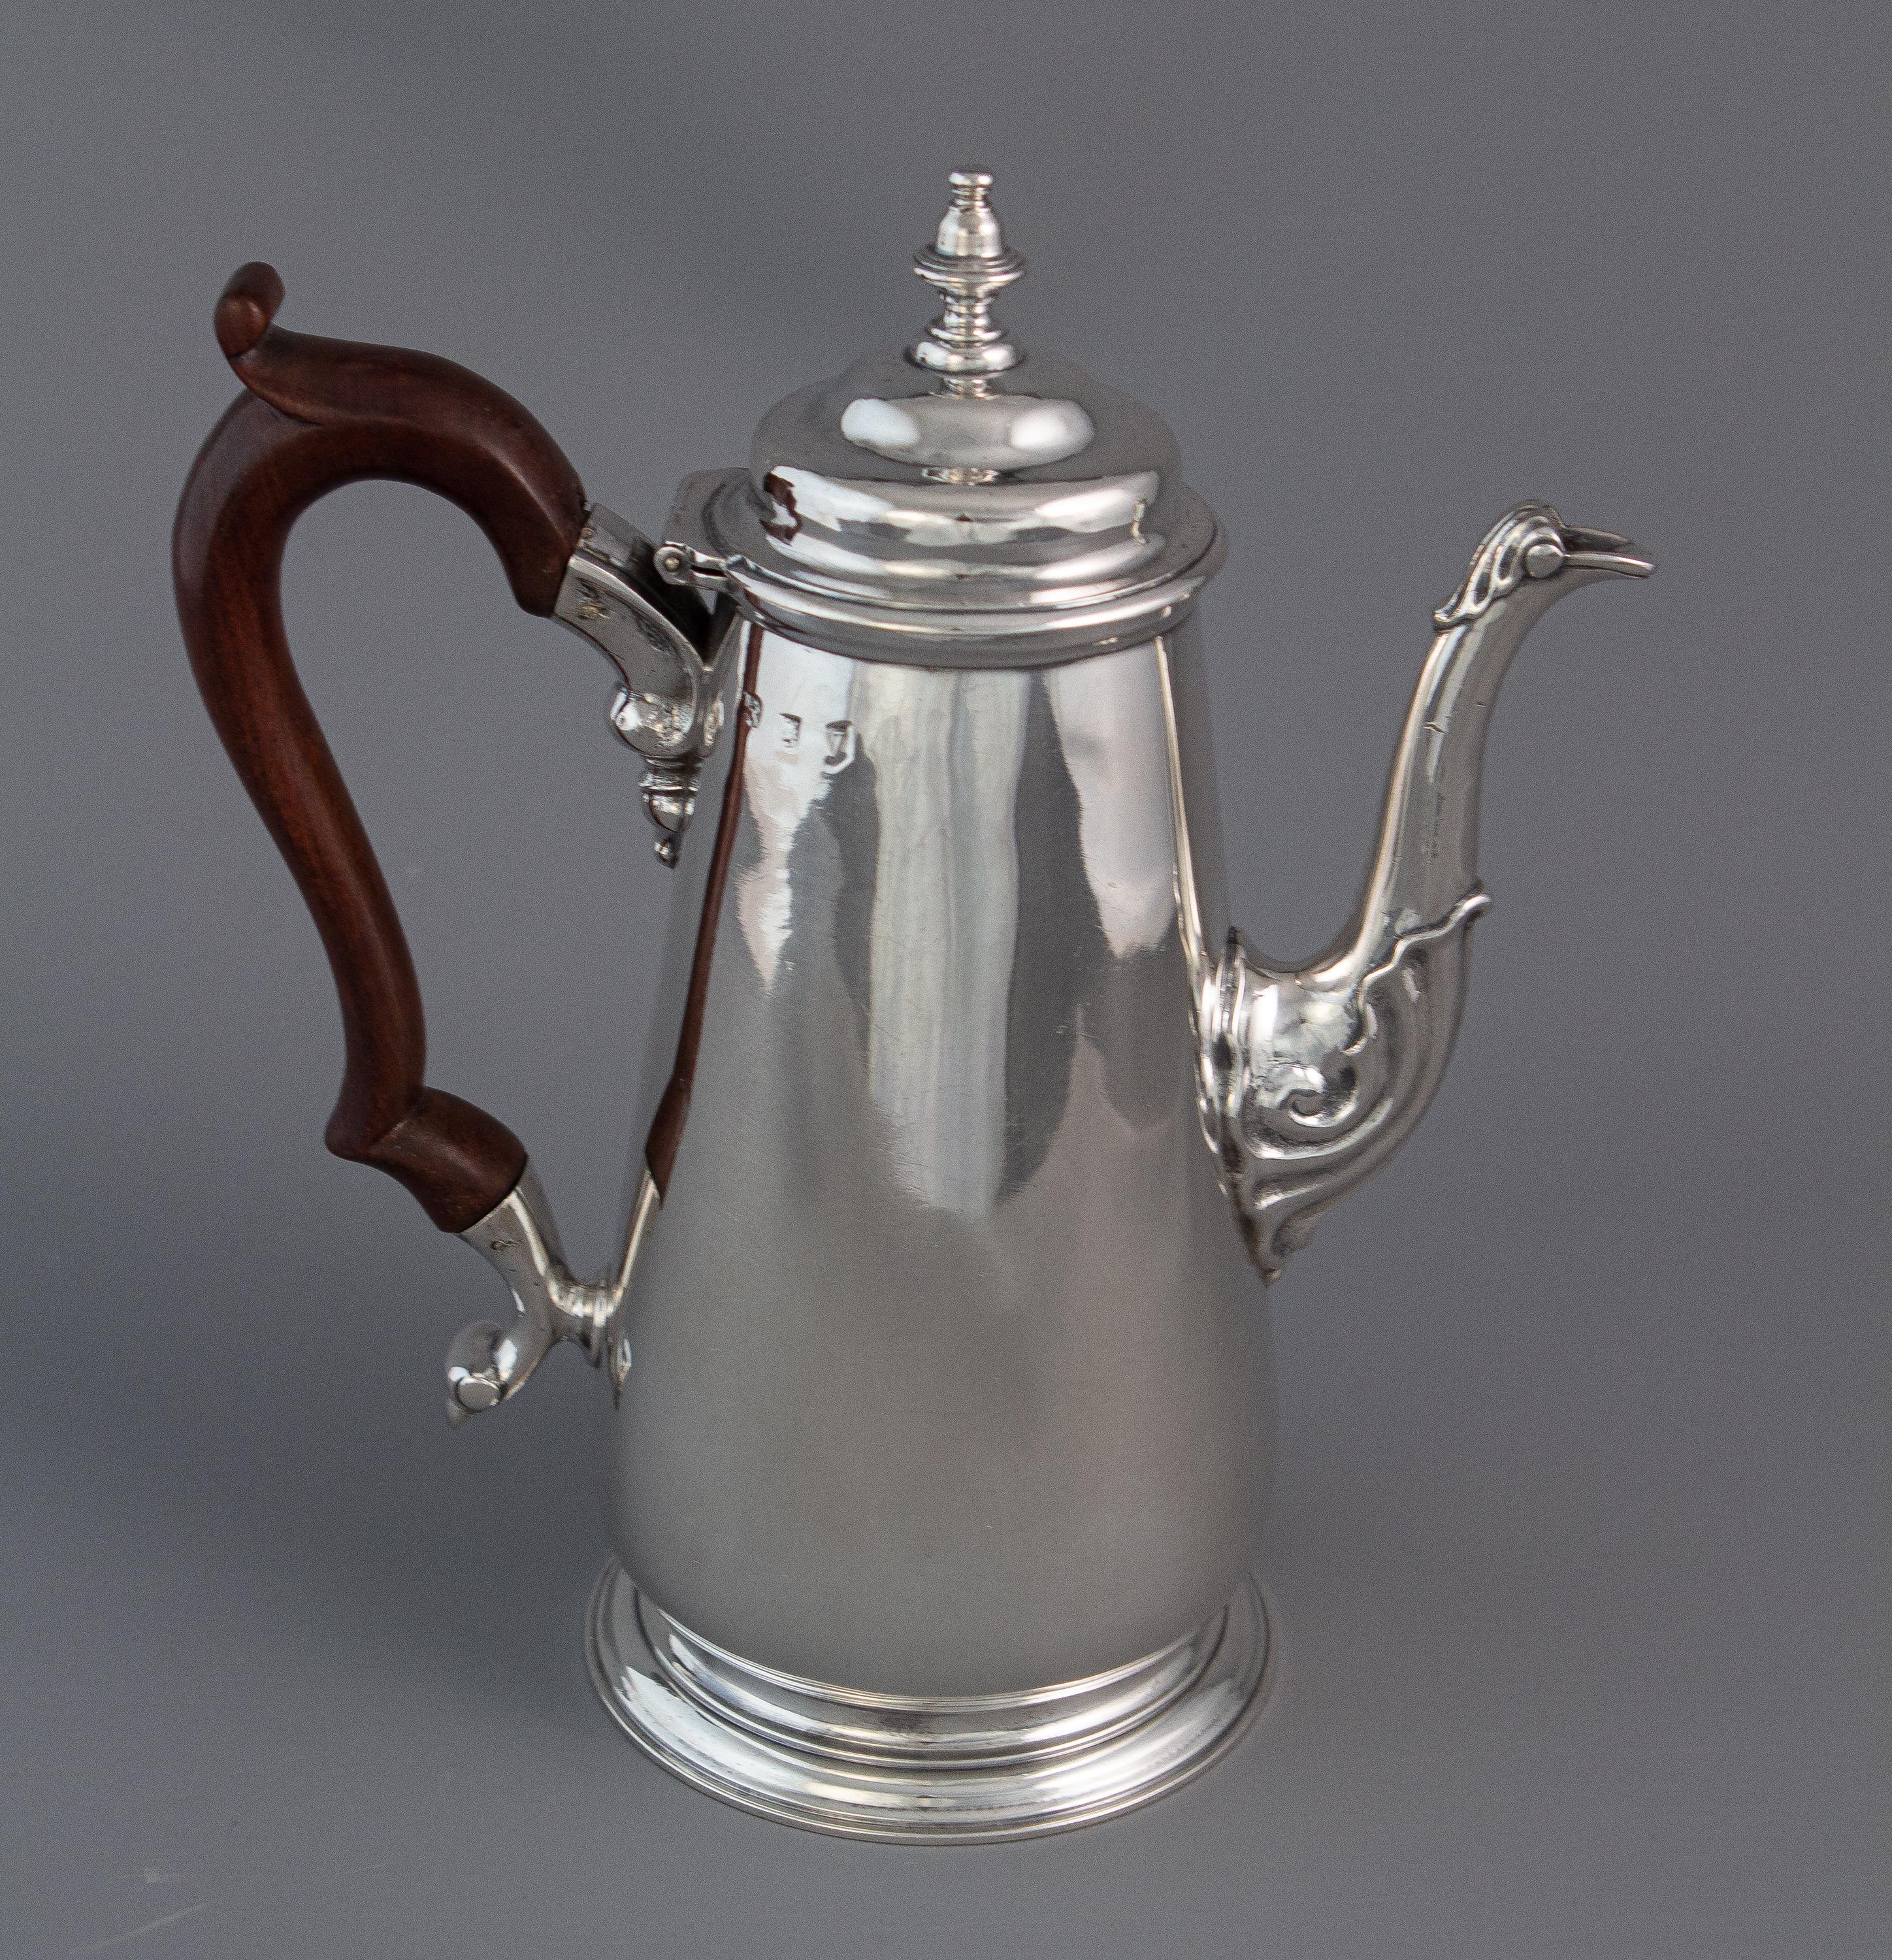 A George II silver coffee pot, London 1735 by Augustin Courtauld. The baluster form body with a scroll decorated cast spout and handle mountings. The stepped and domed lid surmounted with a cast acorn finial. With a scrolling fruitwood handle. All